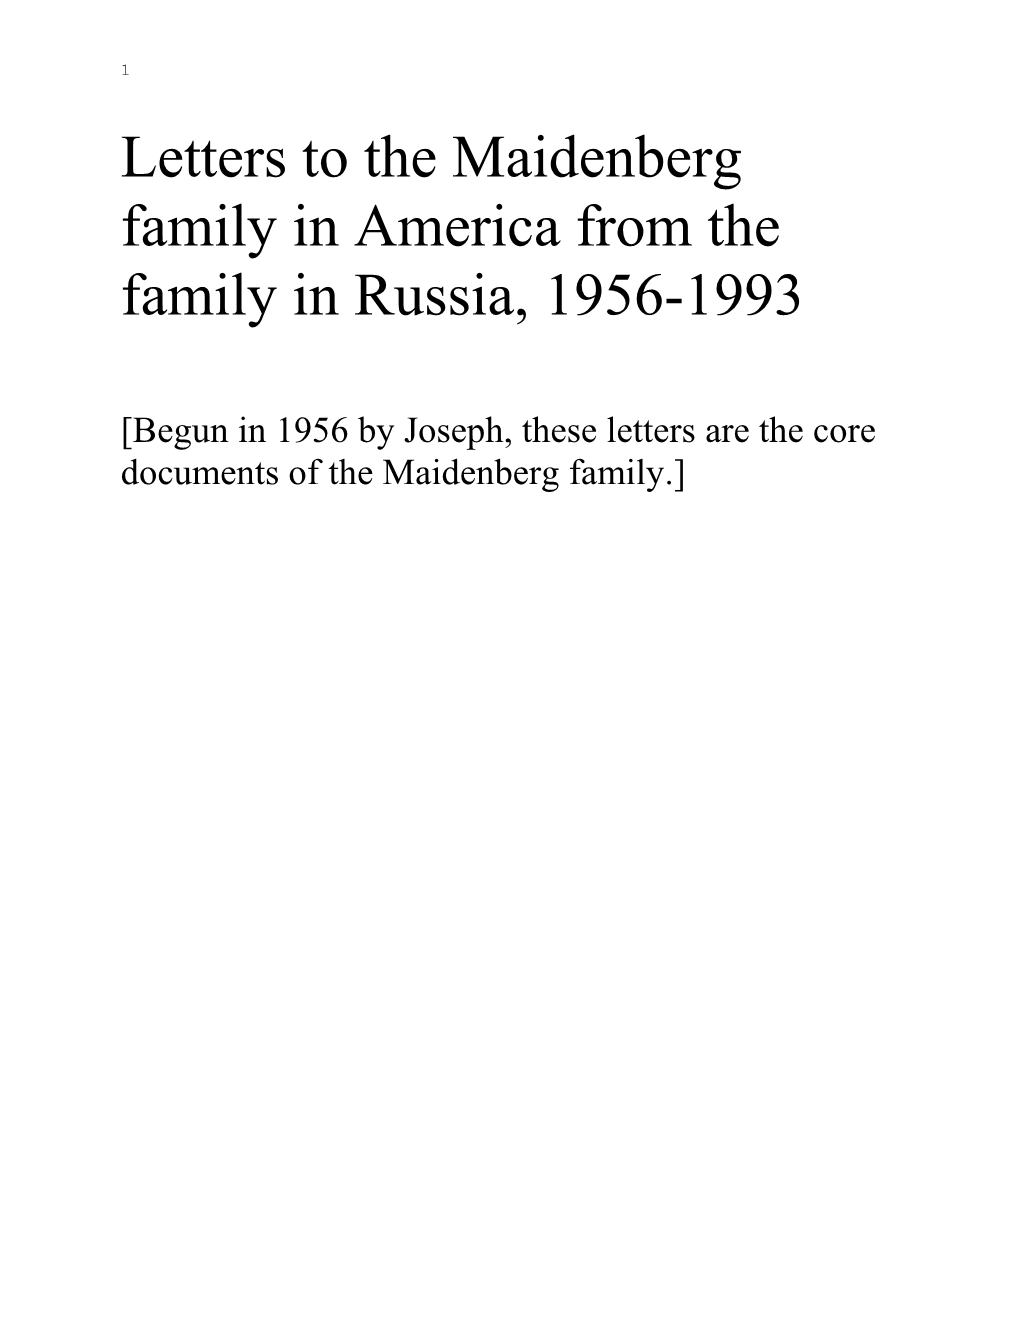 Letters to the Maidenberg Family in America from the Family in Russia, 1956-1993